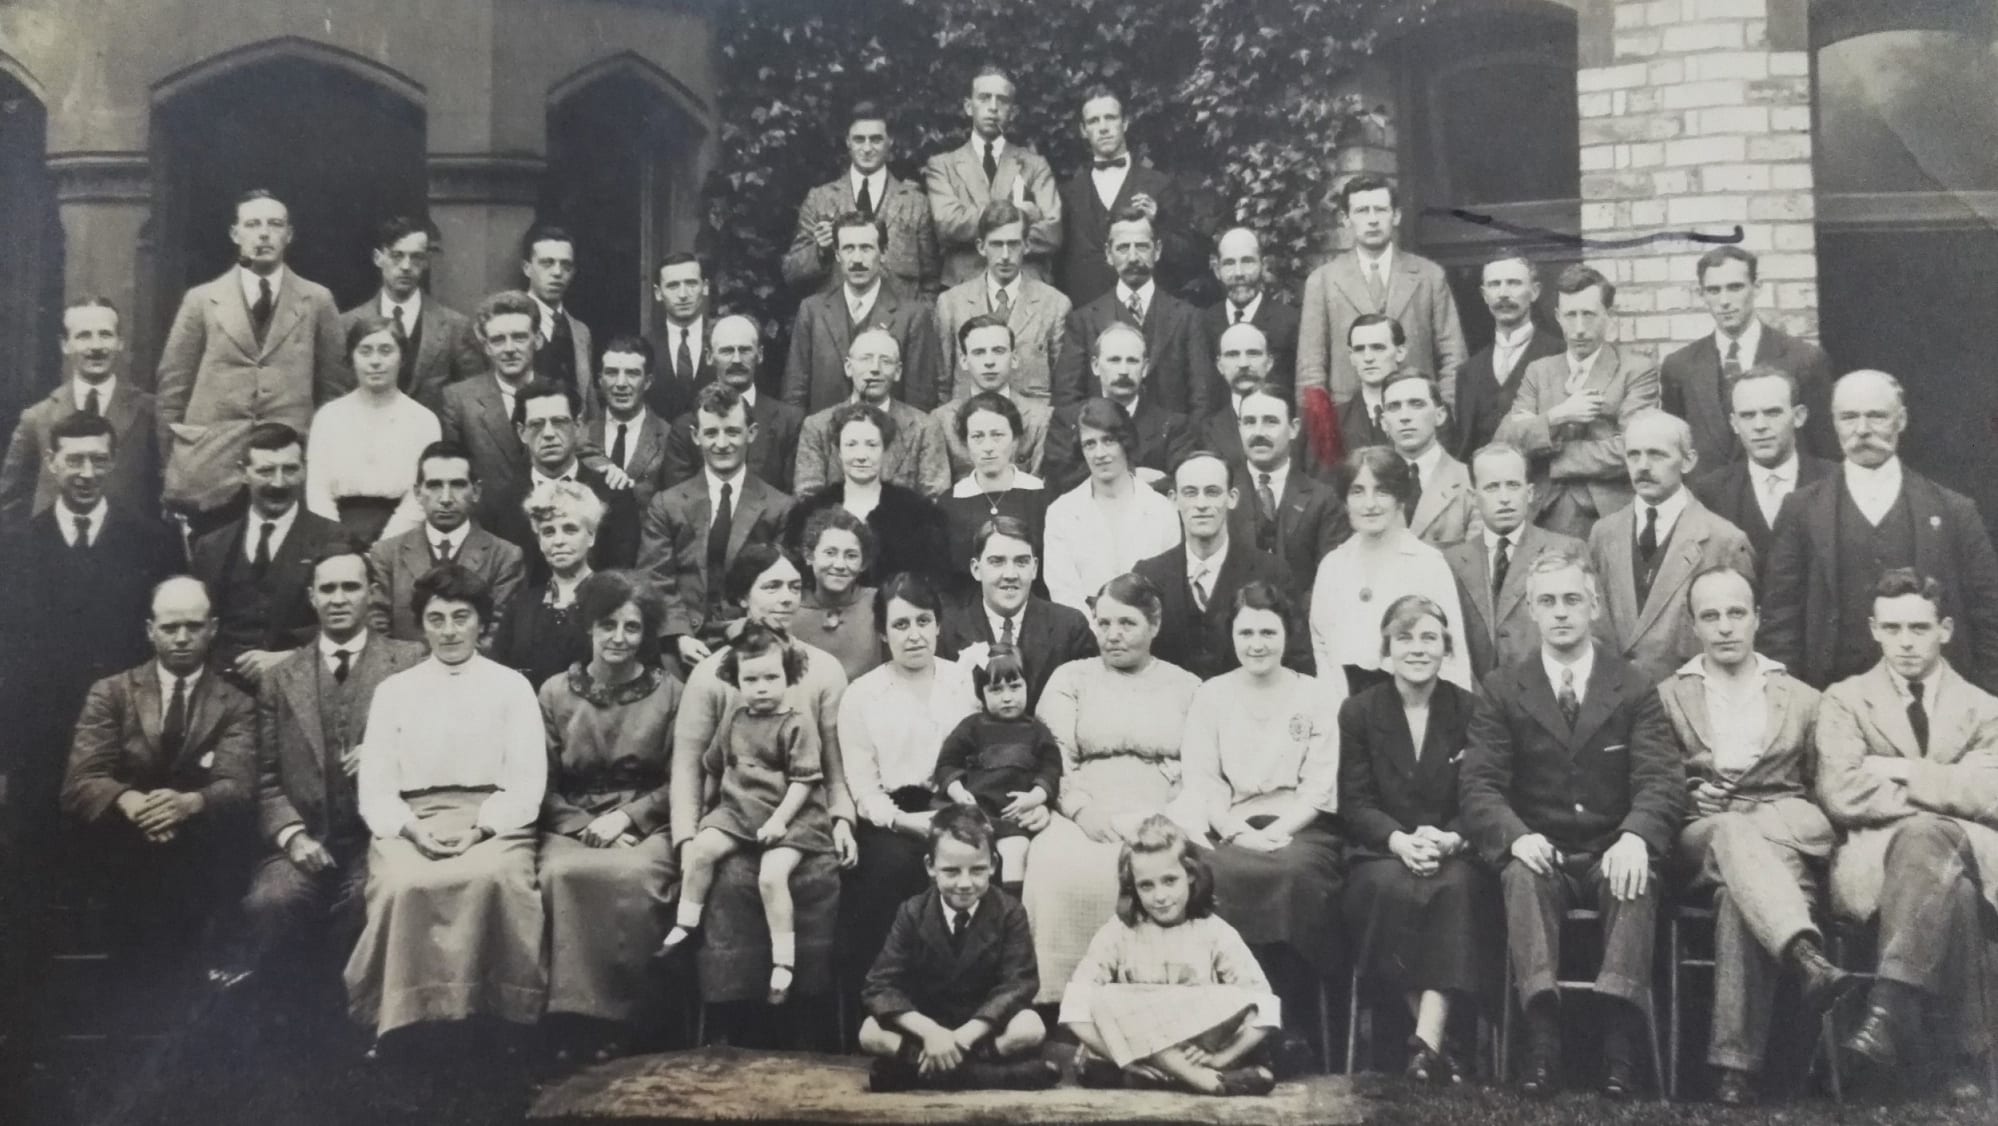 An image of a 1921 WEA Summer school and its participants